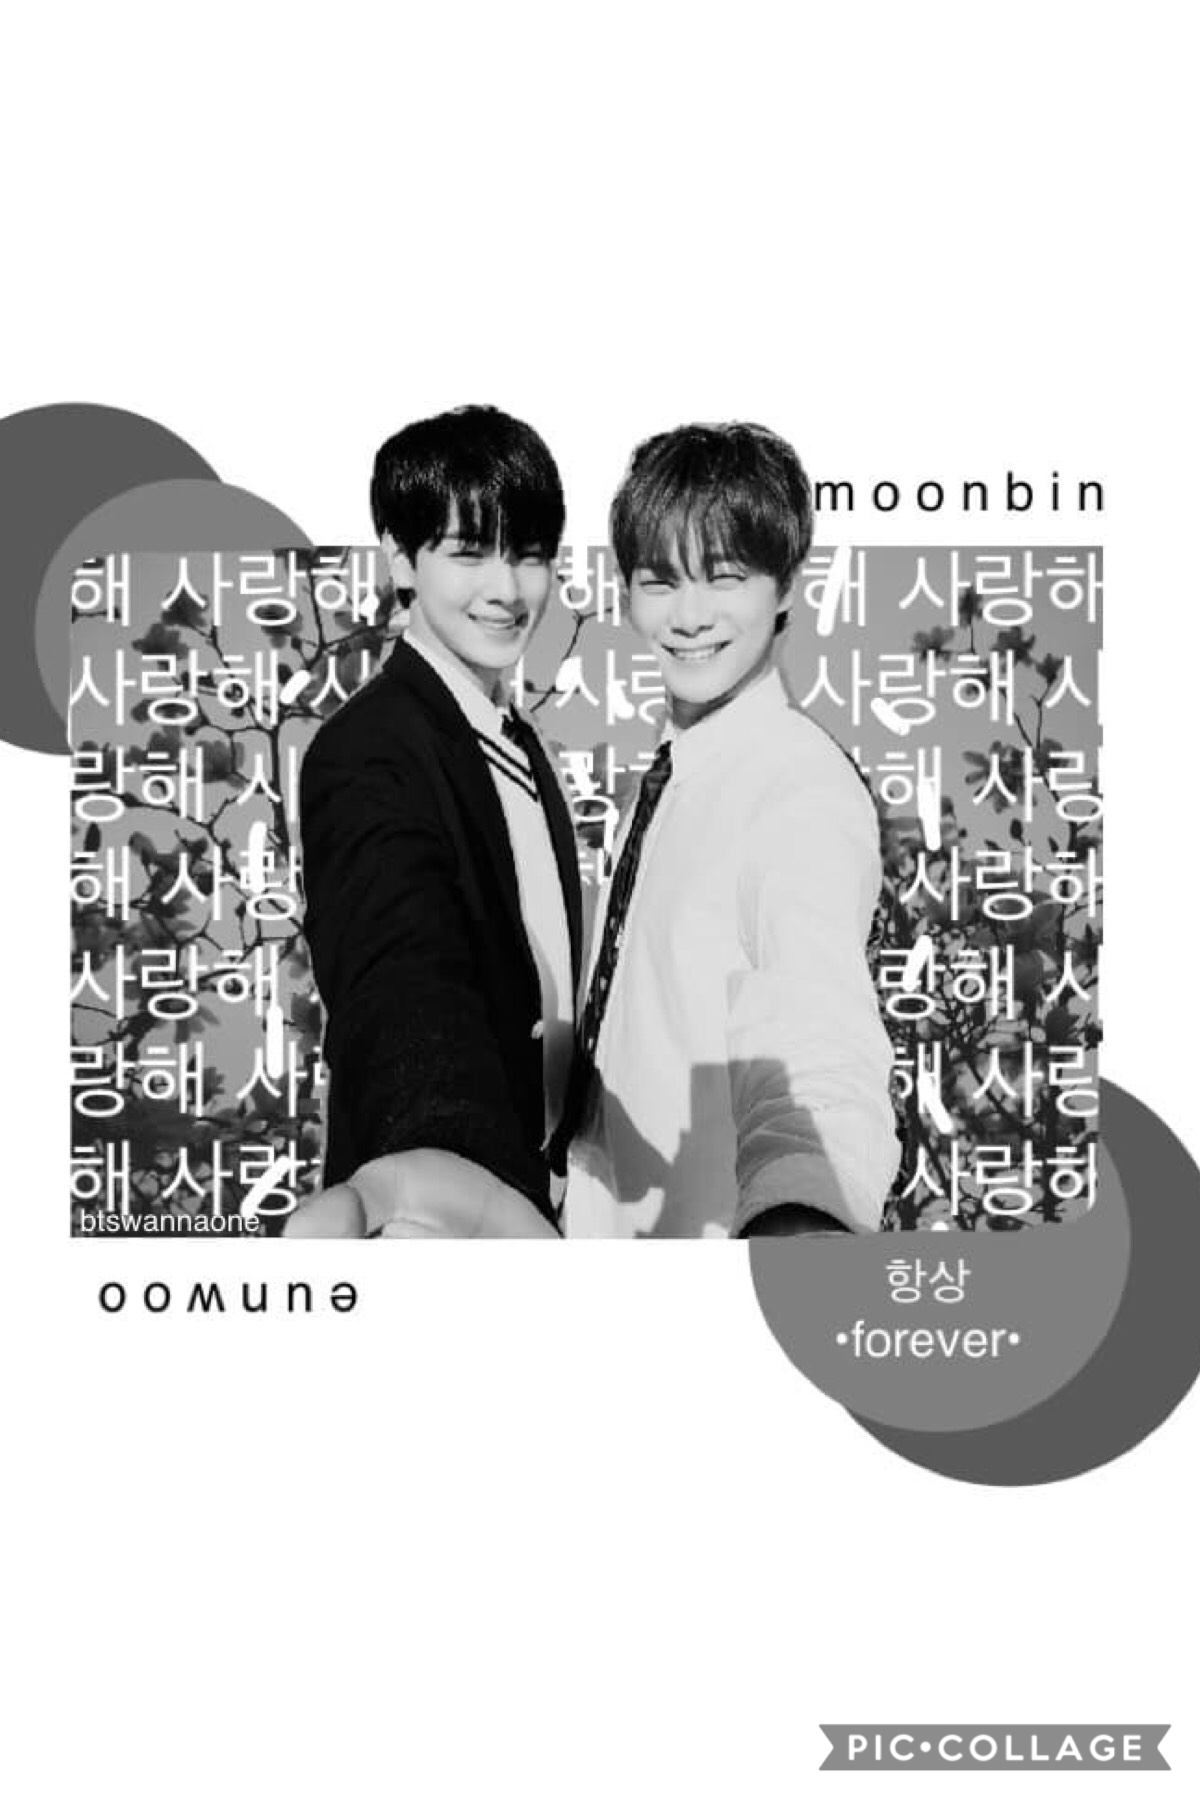 tap
And edit I made for a @jizzle_pwark’s kpop games 💖 Moonbin and Eunwoo from ASTRO